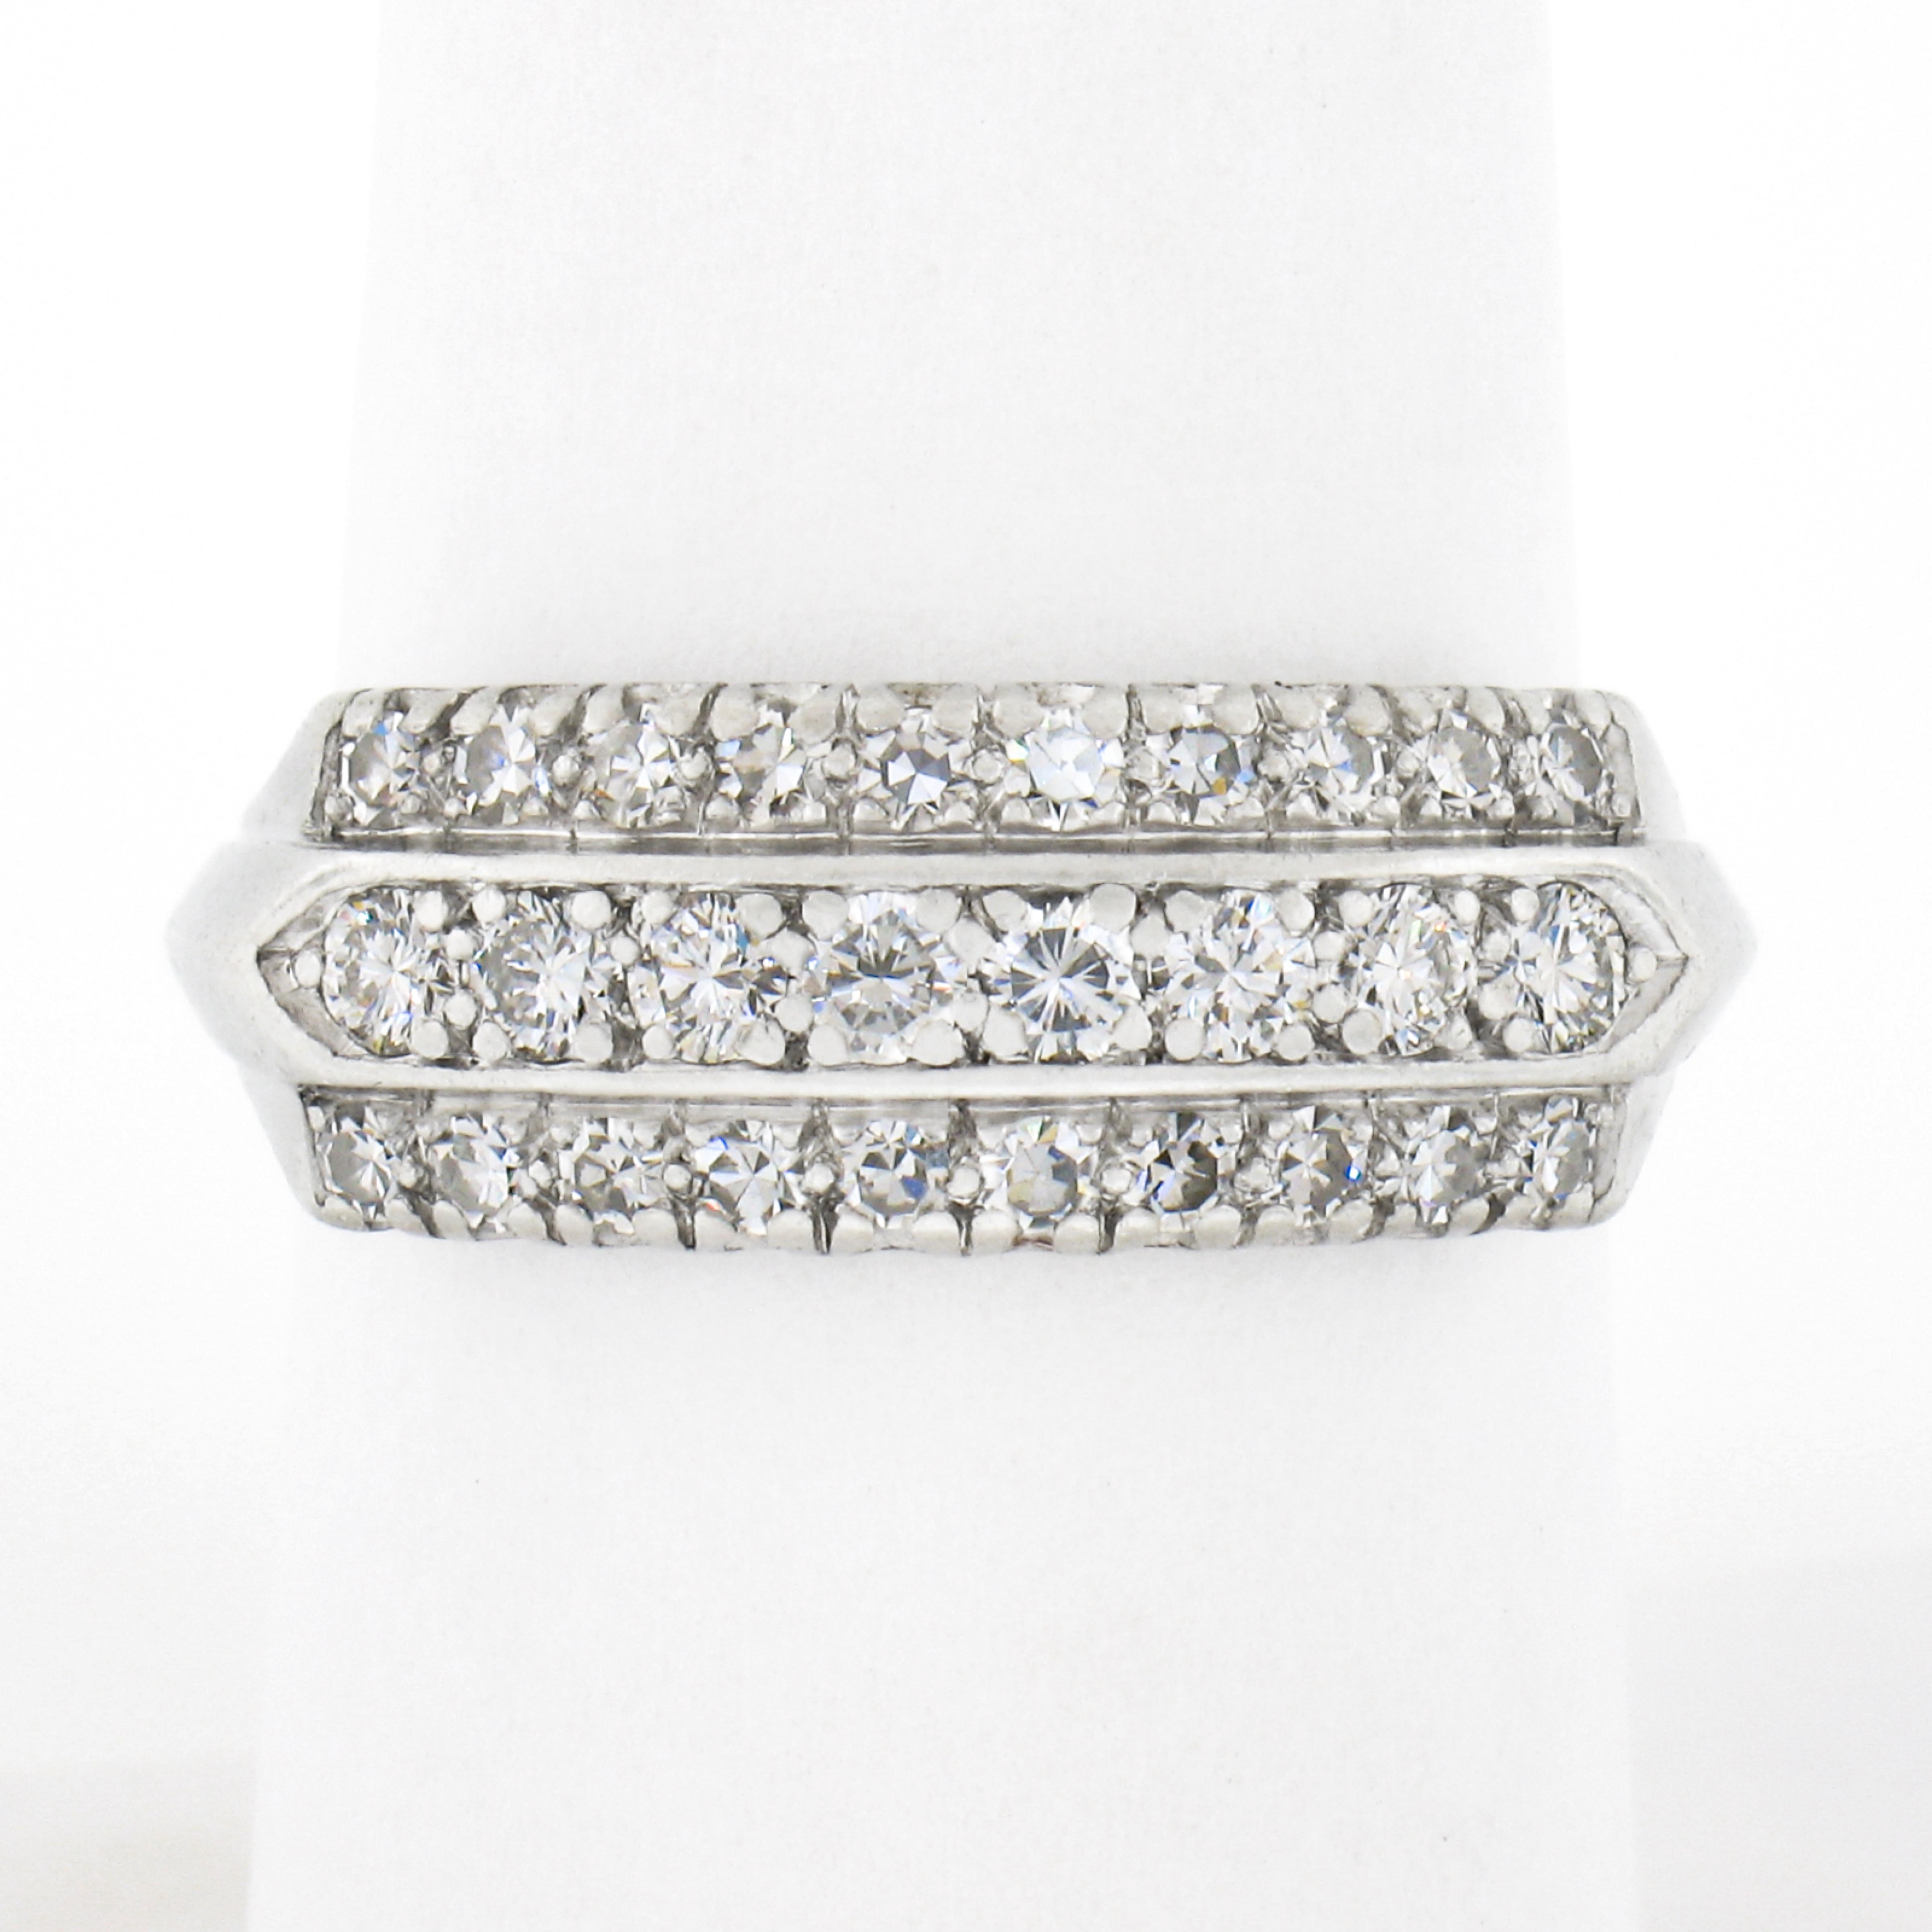 This gorgeous late art deco band ring is crafted in solid platinum and features 3 rows of stunning diamonds elegantly drenched throughout its top in neat fishtail prong settings. These fine diamonds total approximately 0.50 carat in weight and they